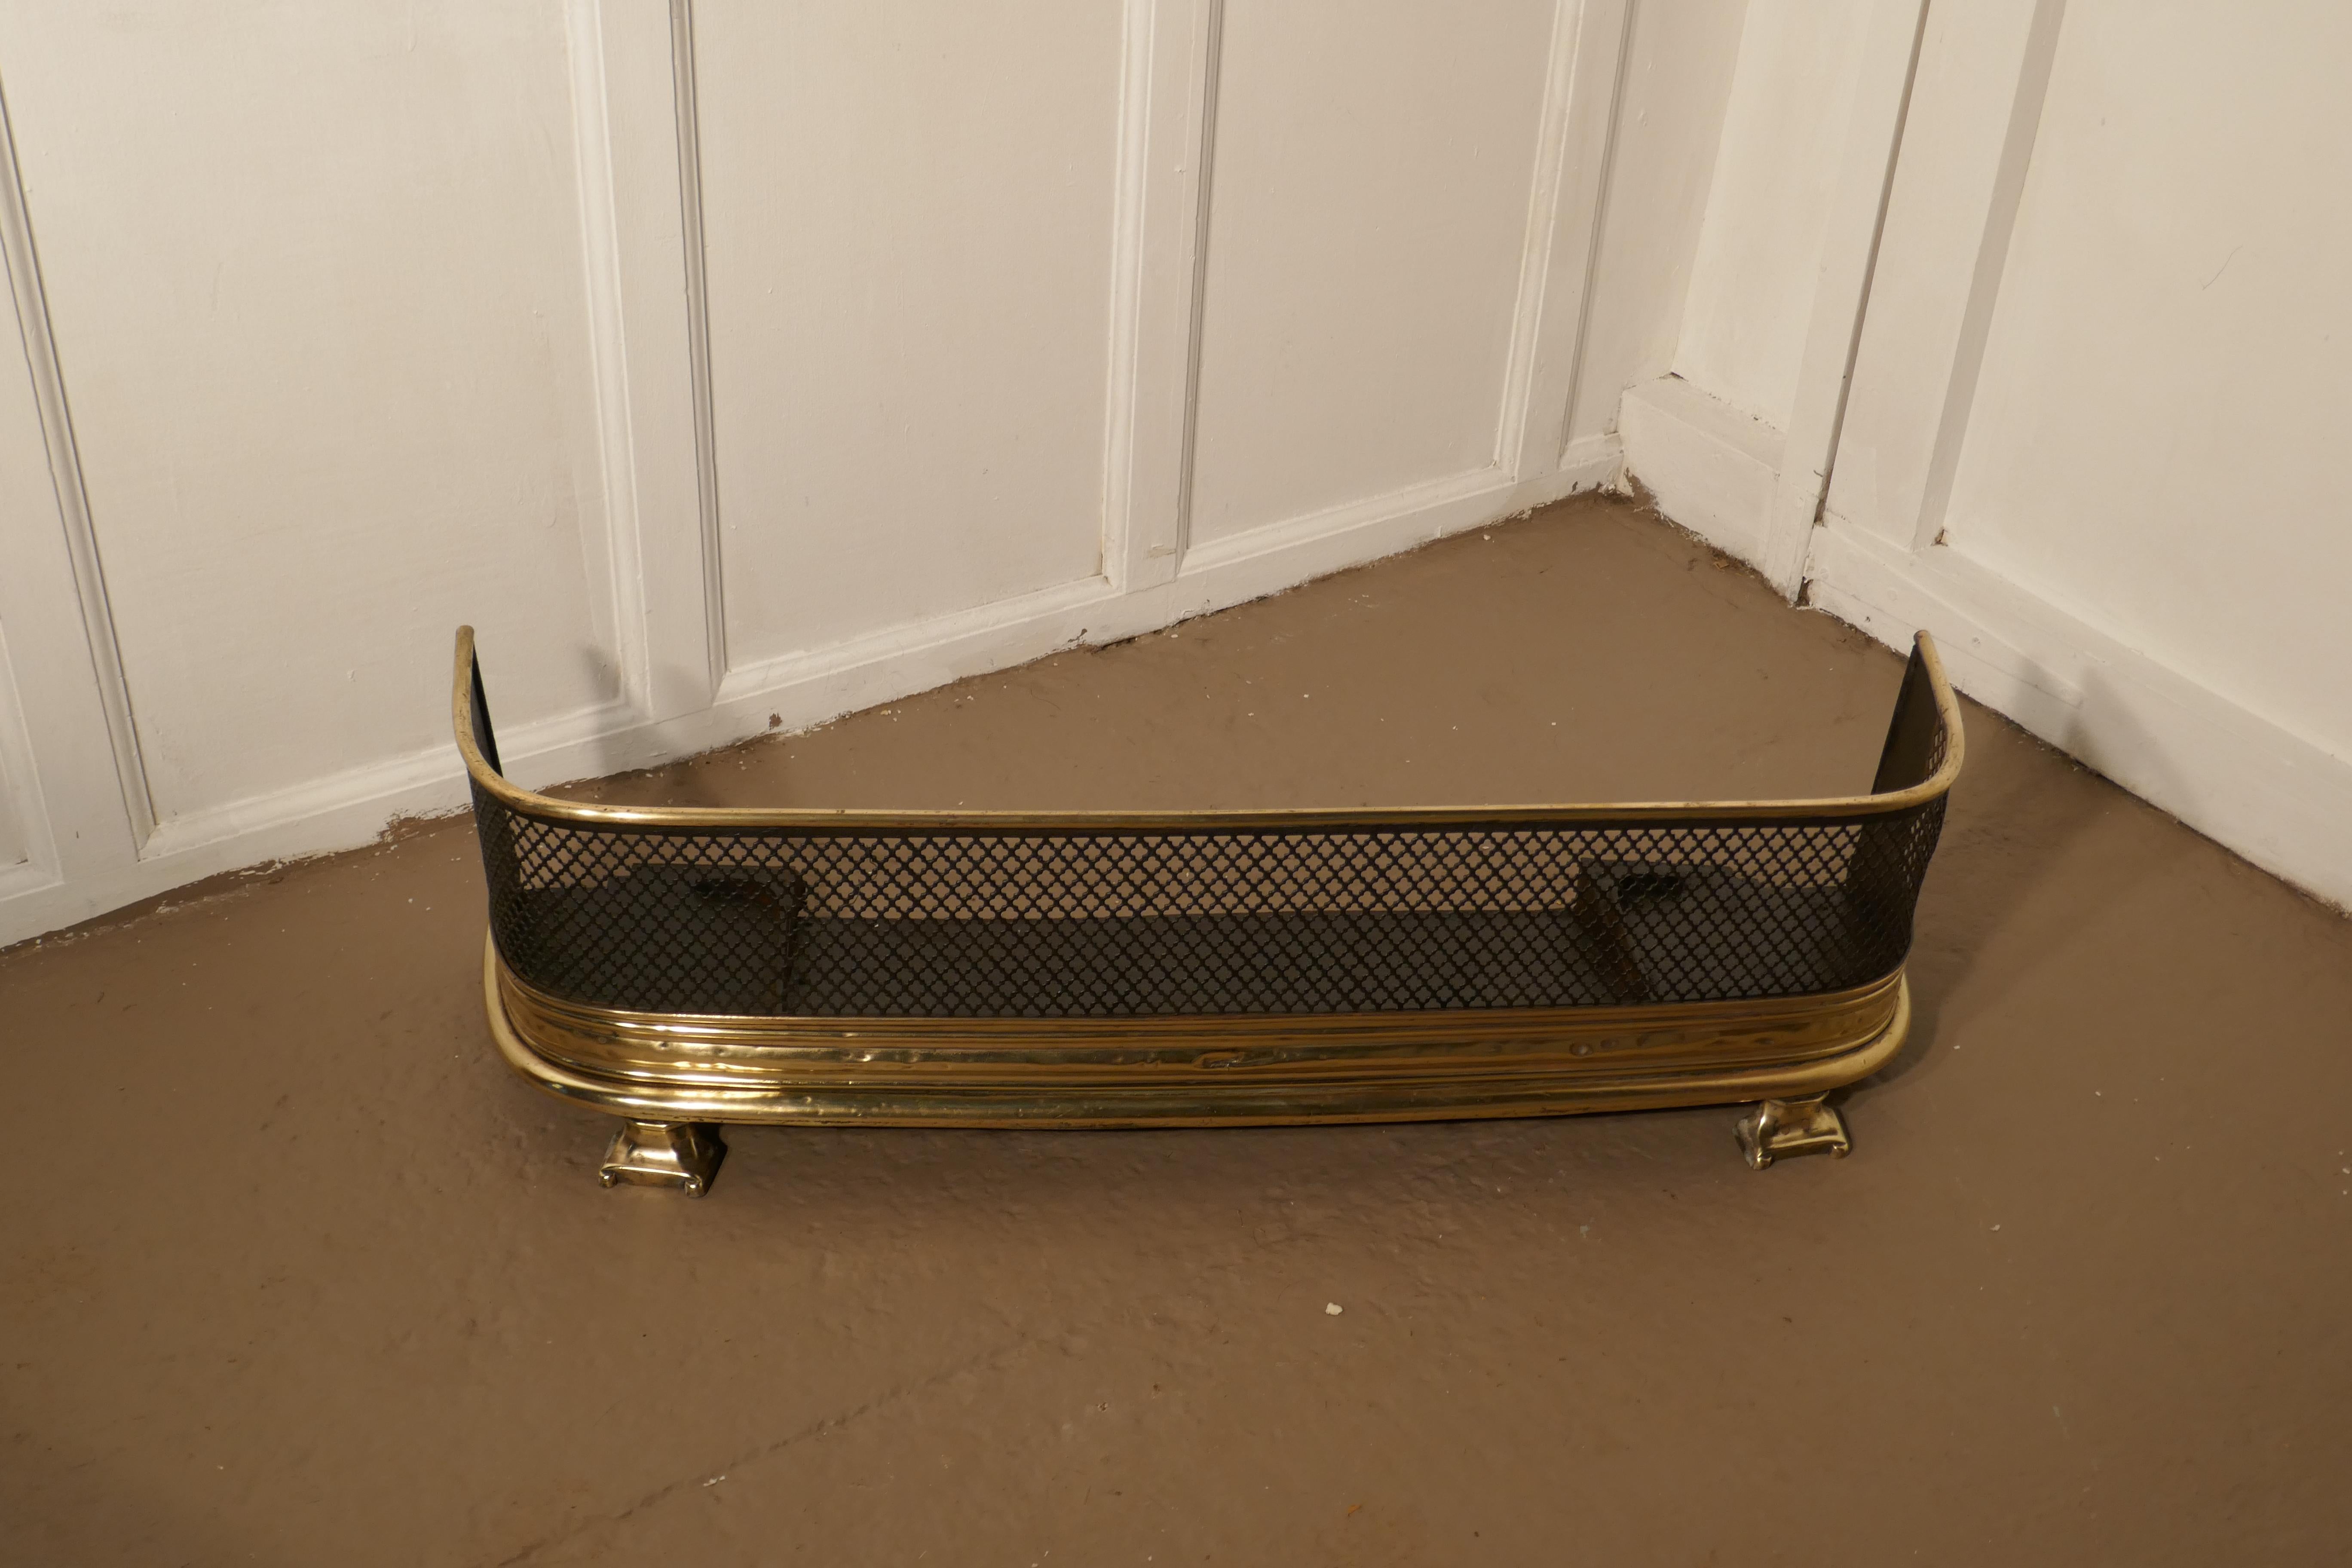 Victorian fireside fender

A Victorian antique fender often known as a nursery guard as it completely surrounds the fire 
The fender has a slightly curved brass top rail, steel metal mesh and a deep brass base with claw feet

The fender is in